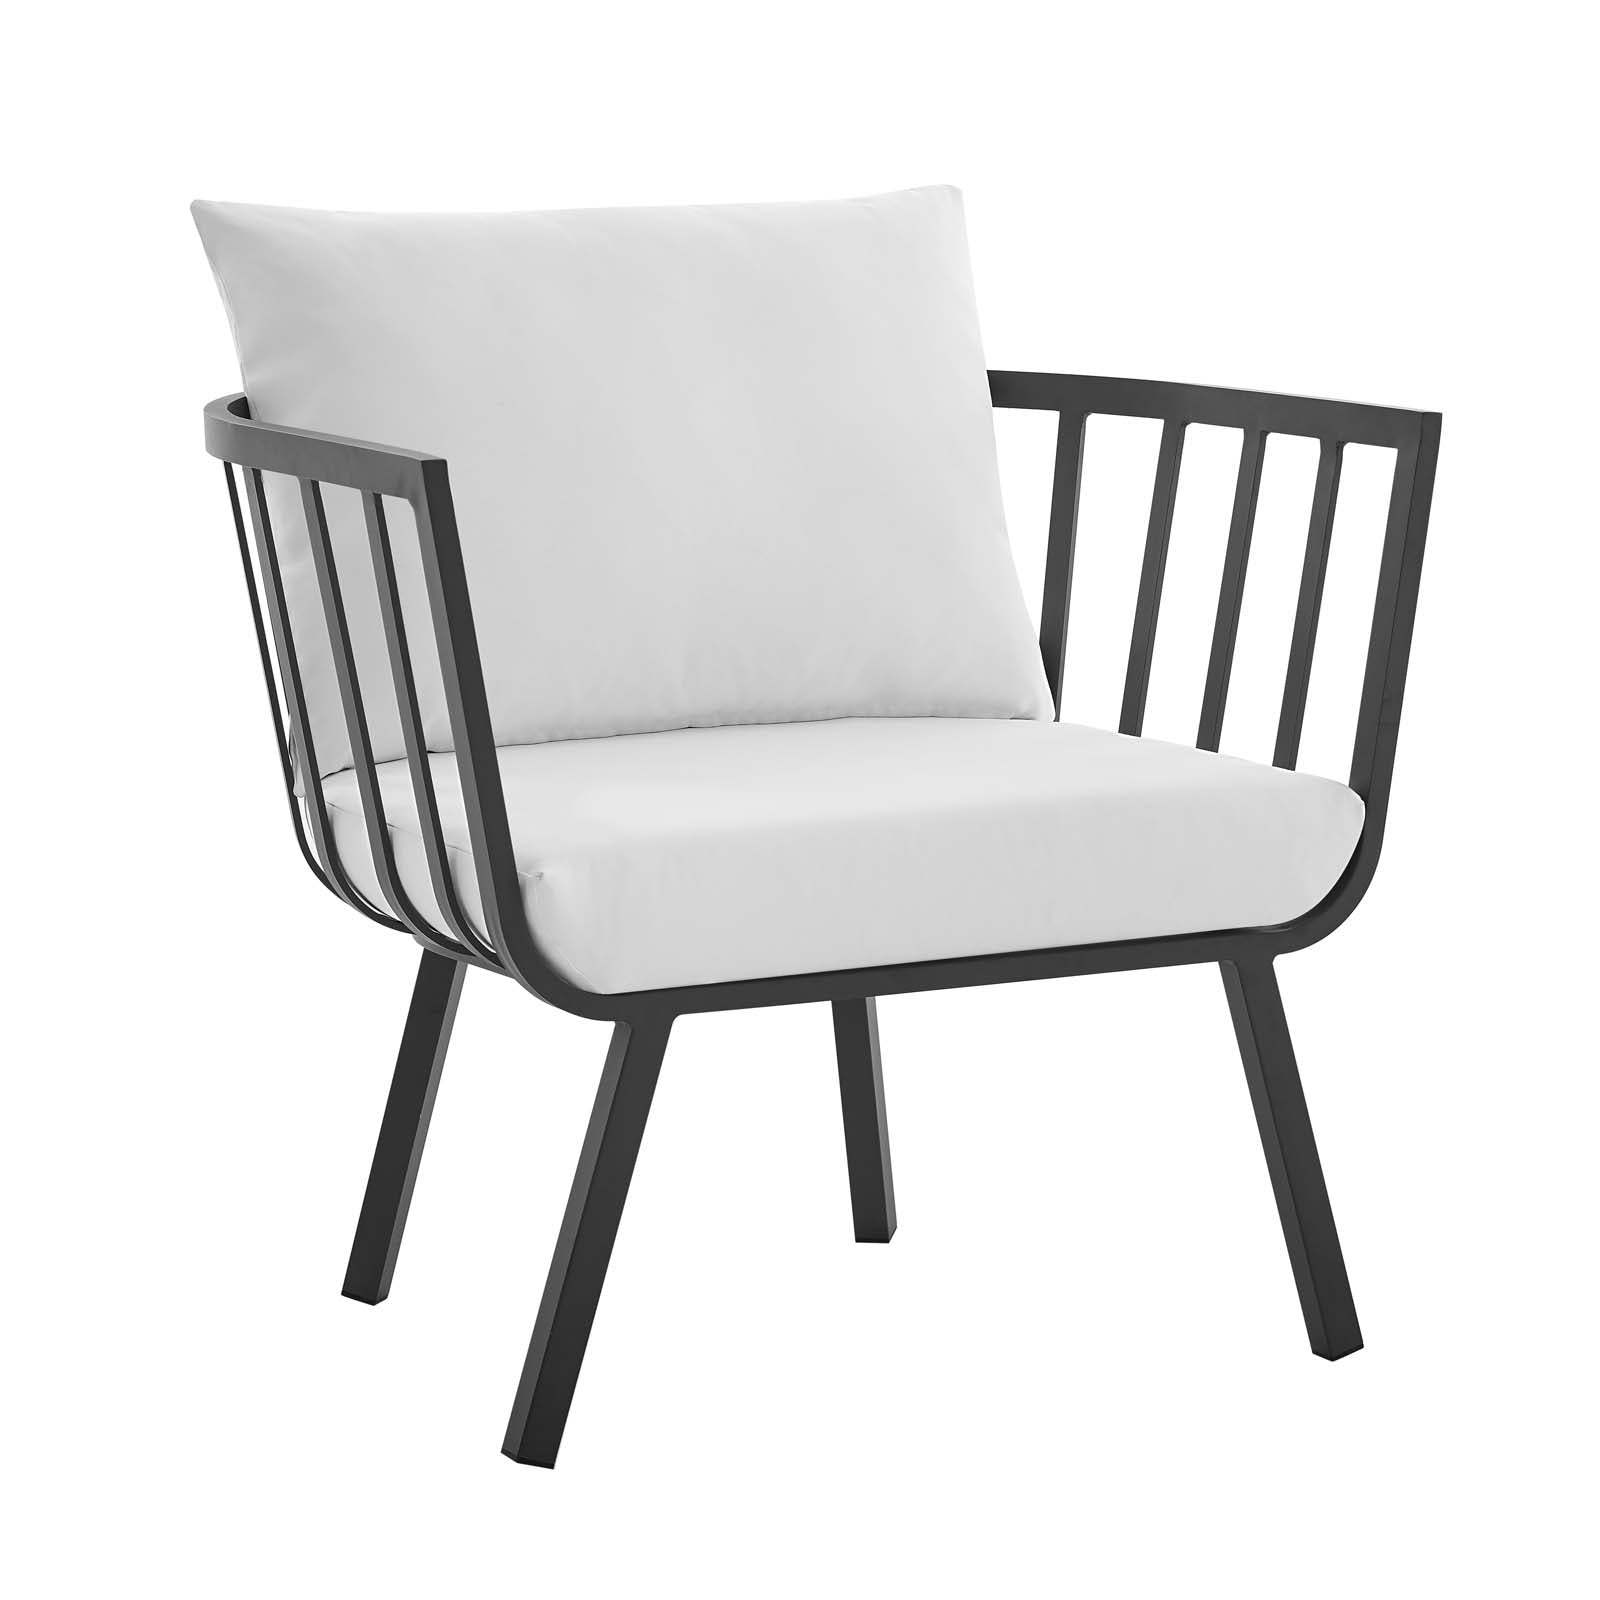 Modway Outdoor Chairs - Riverside Outdoor Armchair Gray & White